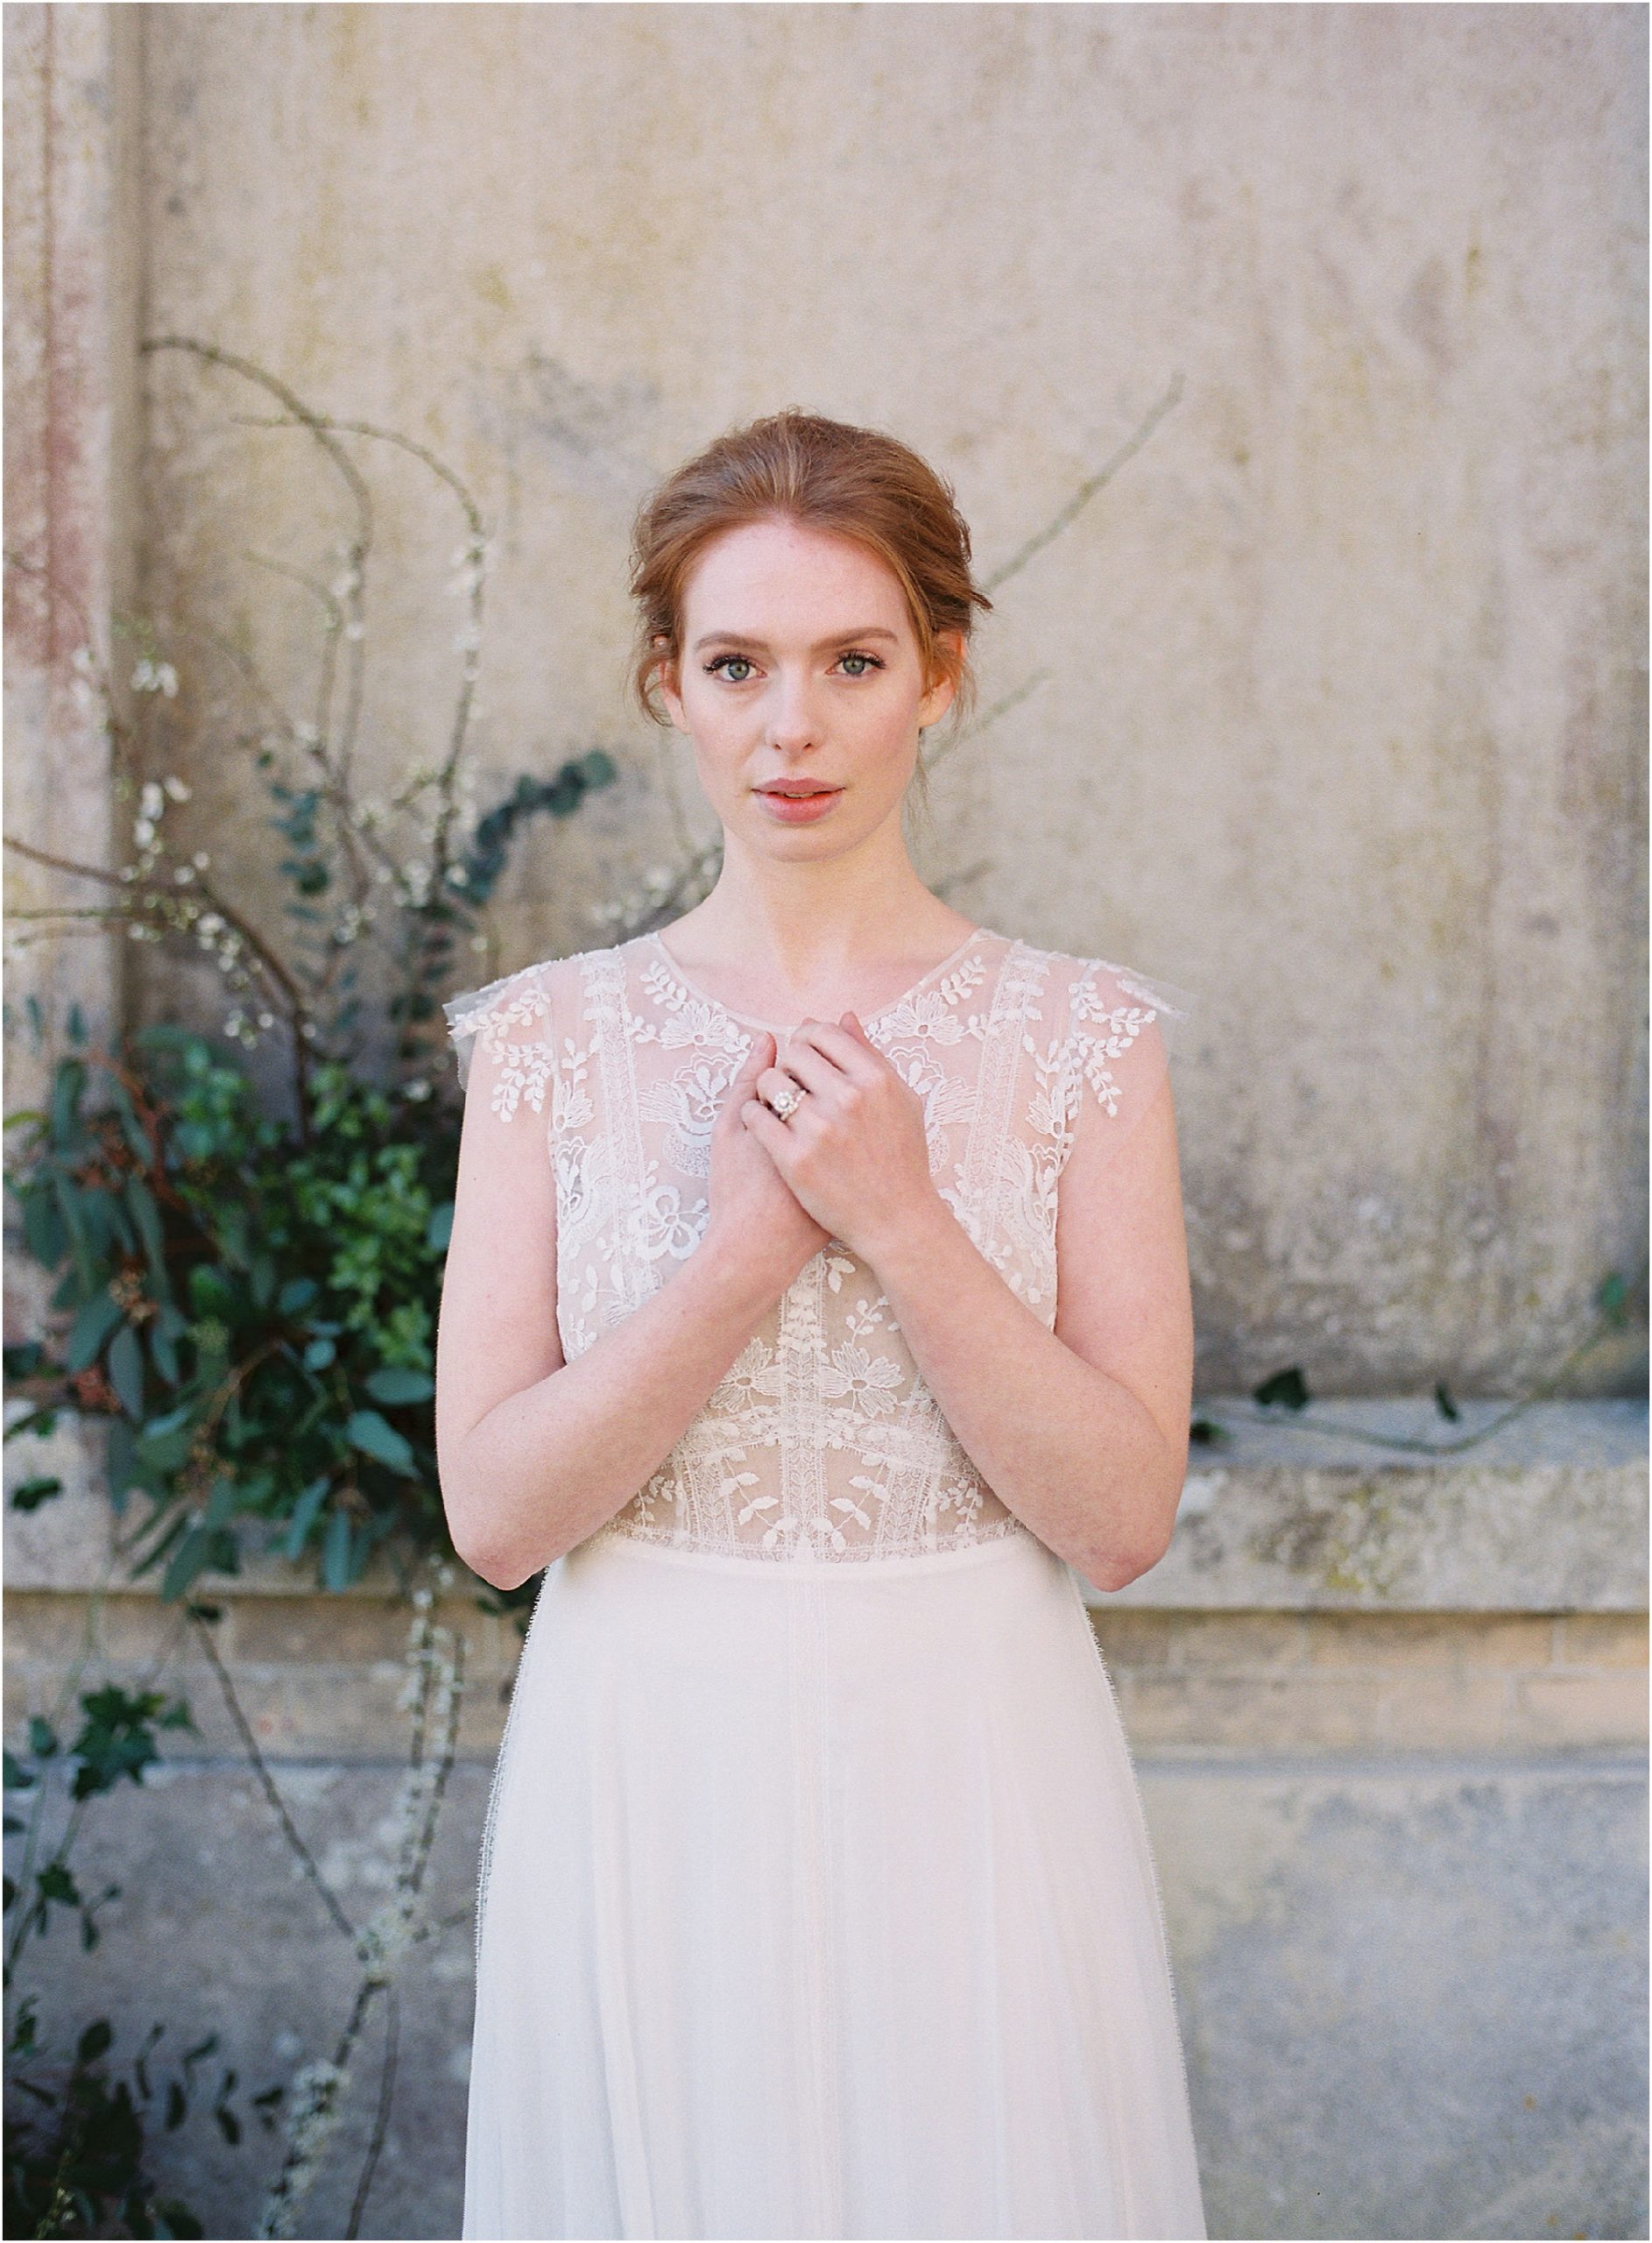 Bride with red hair in lace delicate wedding dress